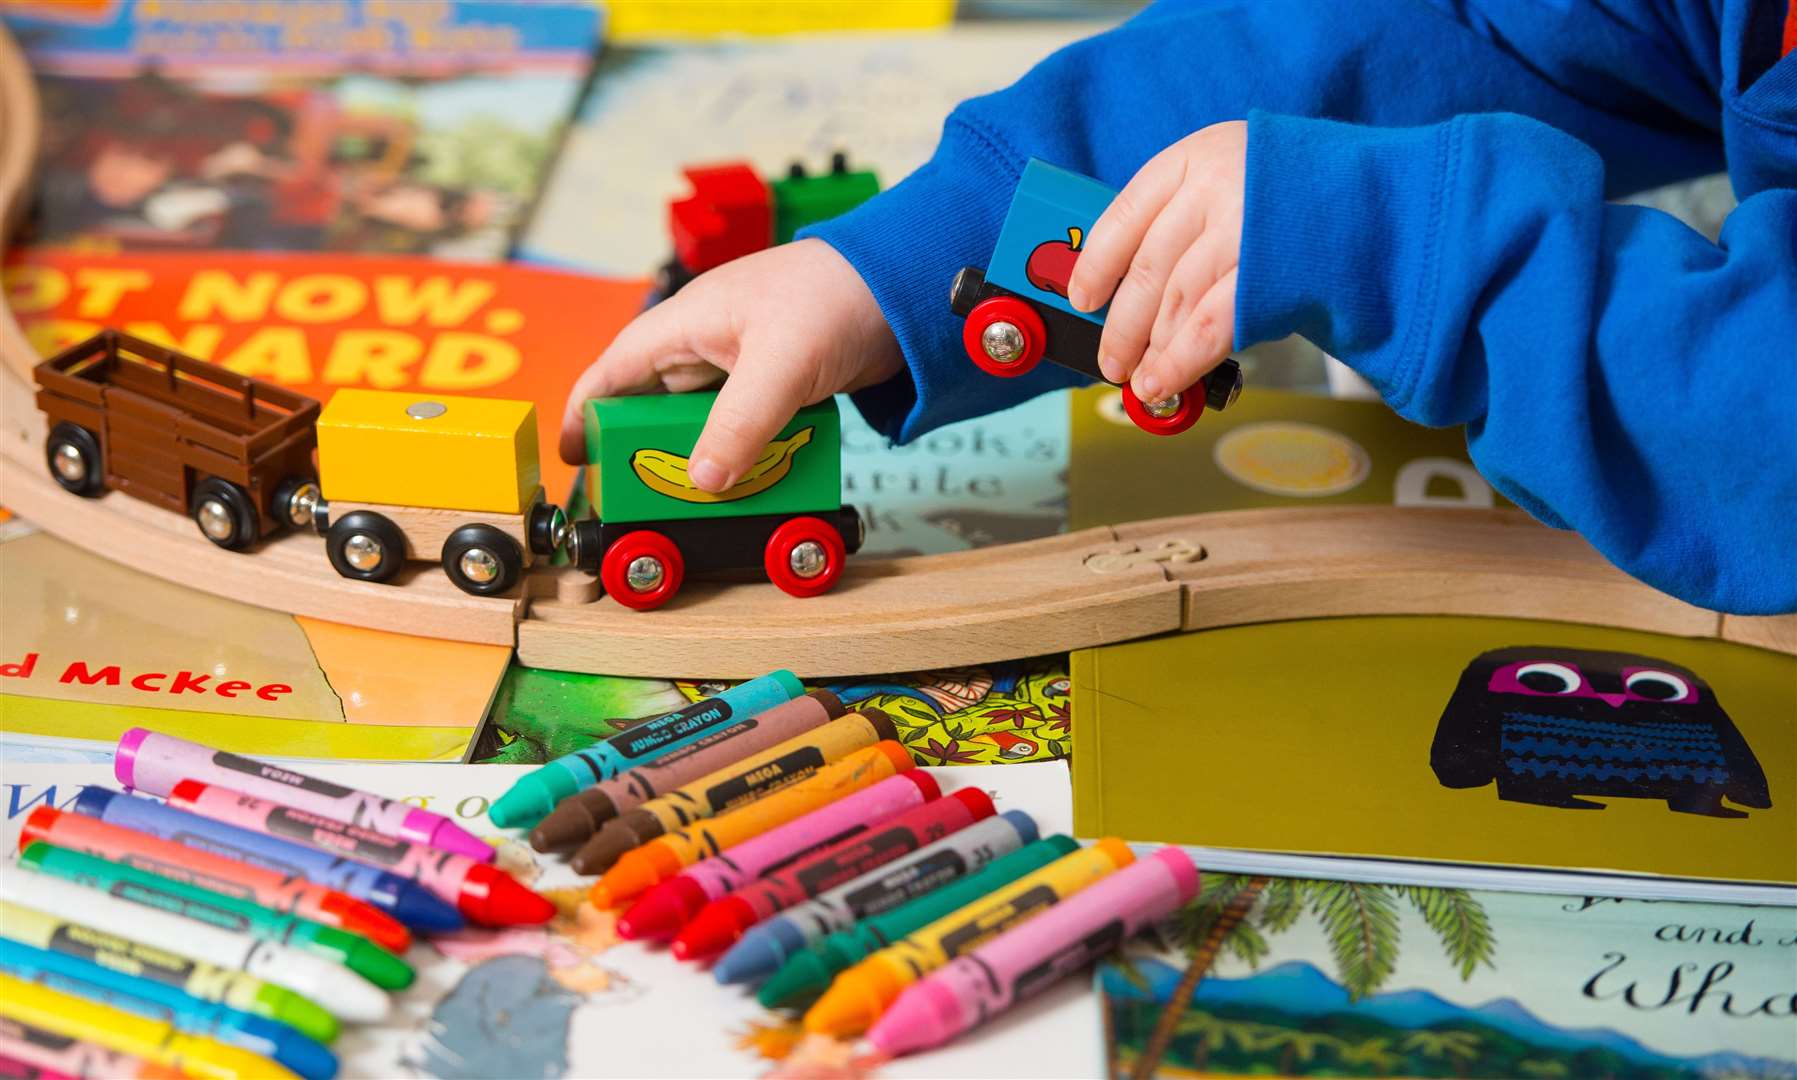 Evolution Kids Club and Nursery closed after a series of poor Ofsted reviews. Picture: Dominic Lipinski/PA